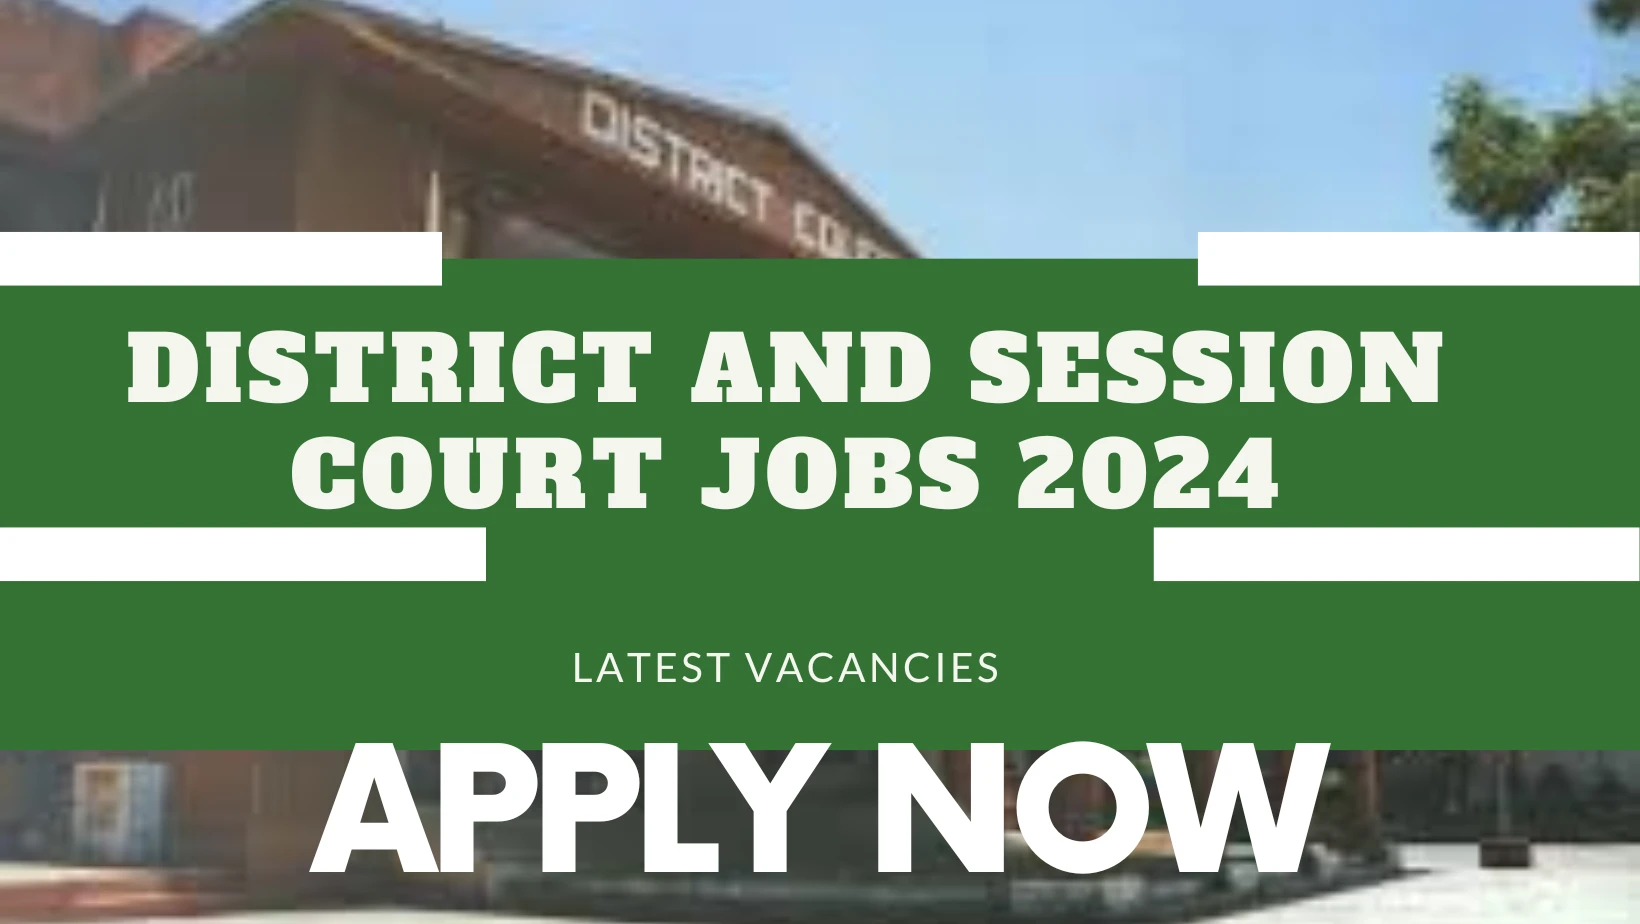 District and Session Court  Jobs positions, for the year 2024 are now open, for applications. Apply today!